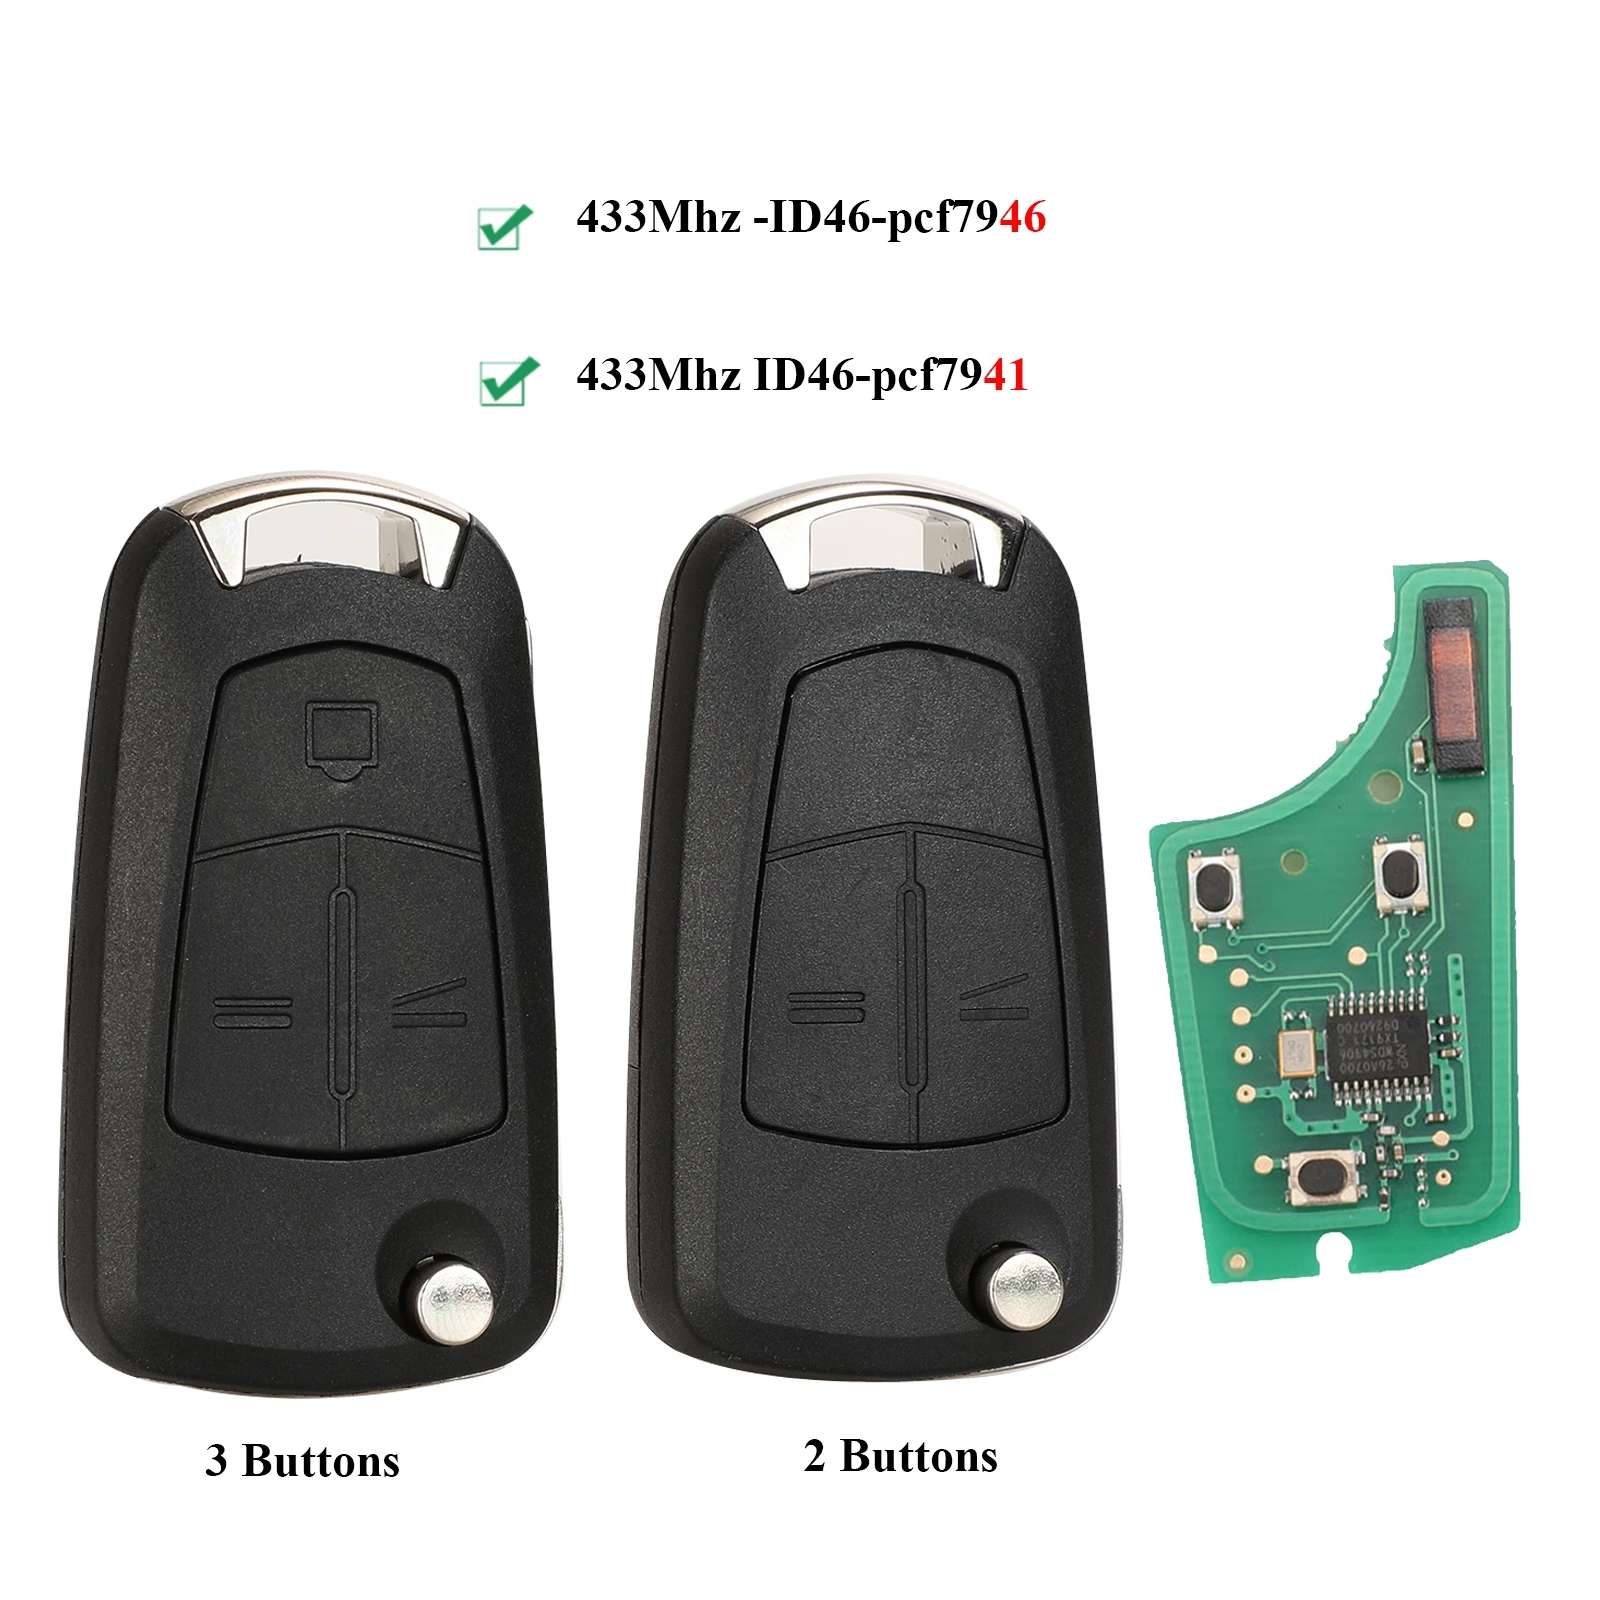 Car Remote PCF7941 Key for Opel/Vauxhall Astra H 2004-2009, Zafira B 2005-2013 PCF7946 Vectra C 2002-2008 Signium